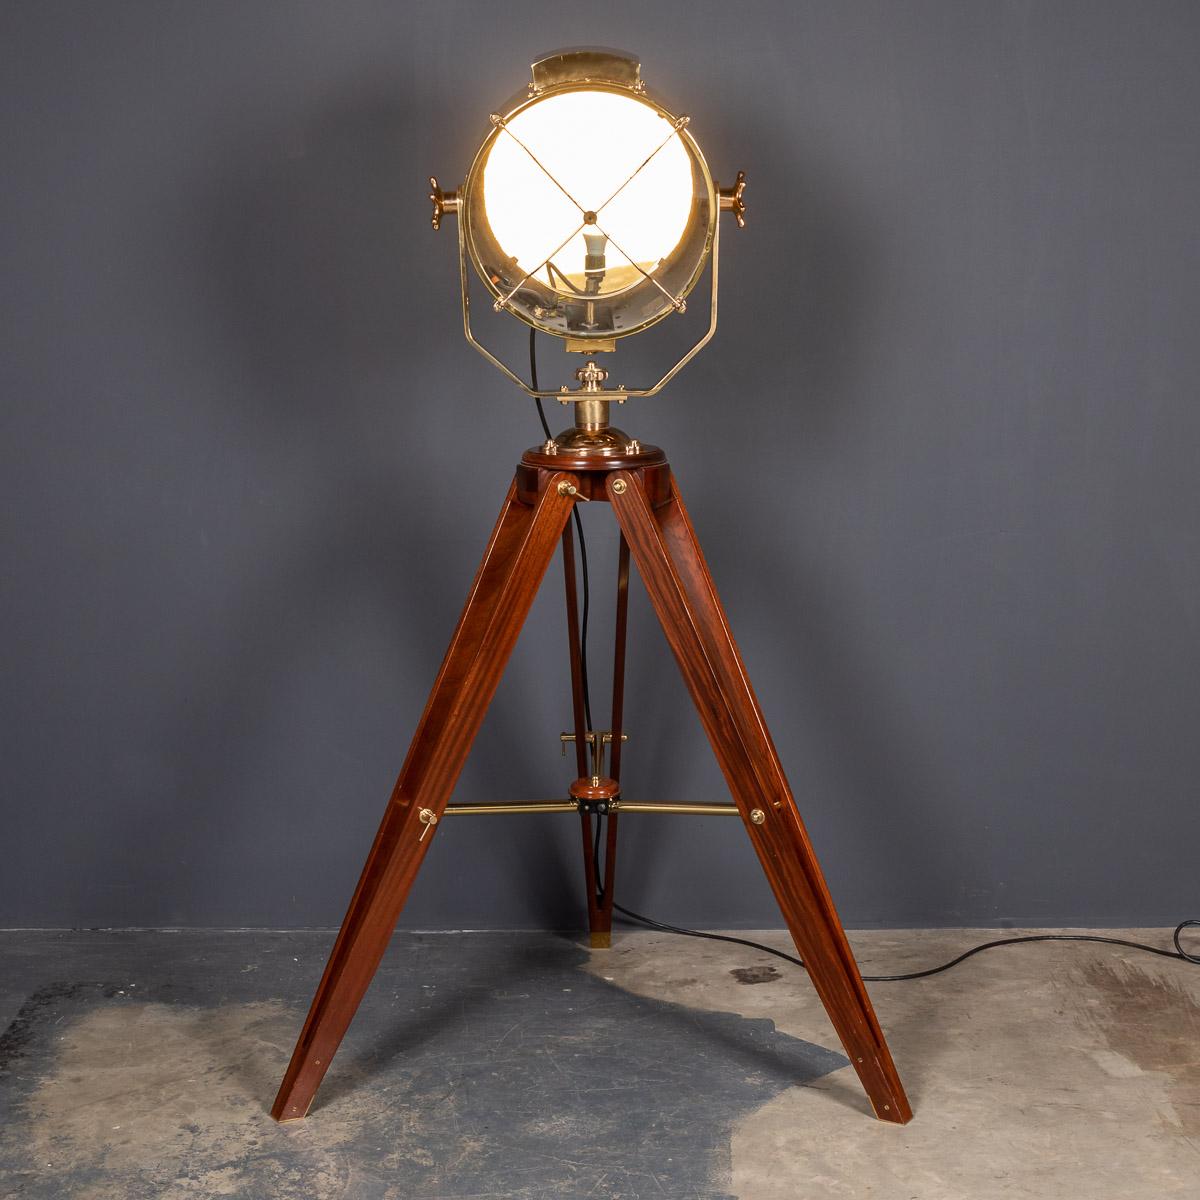 A fantastic mid-20th century English polished brass naval searchlight, mounted on a later tripod. These lamps would have been mounted on military or shipping vessels. This example has been professionally polished and rewired to make for a fantastic